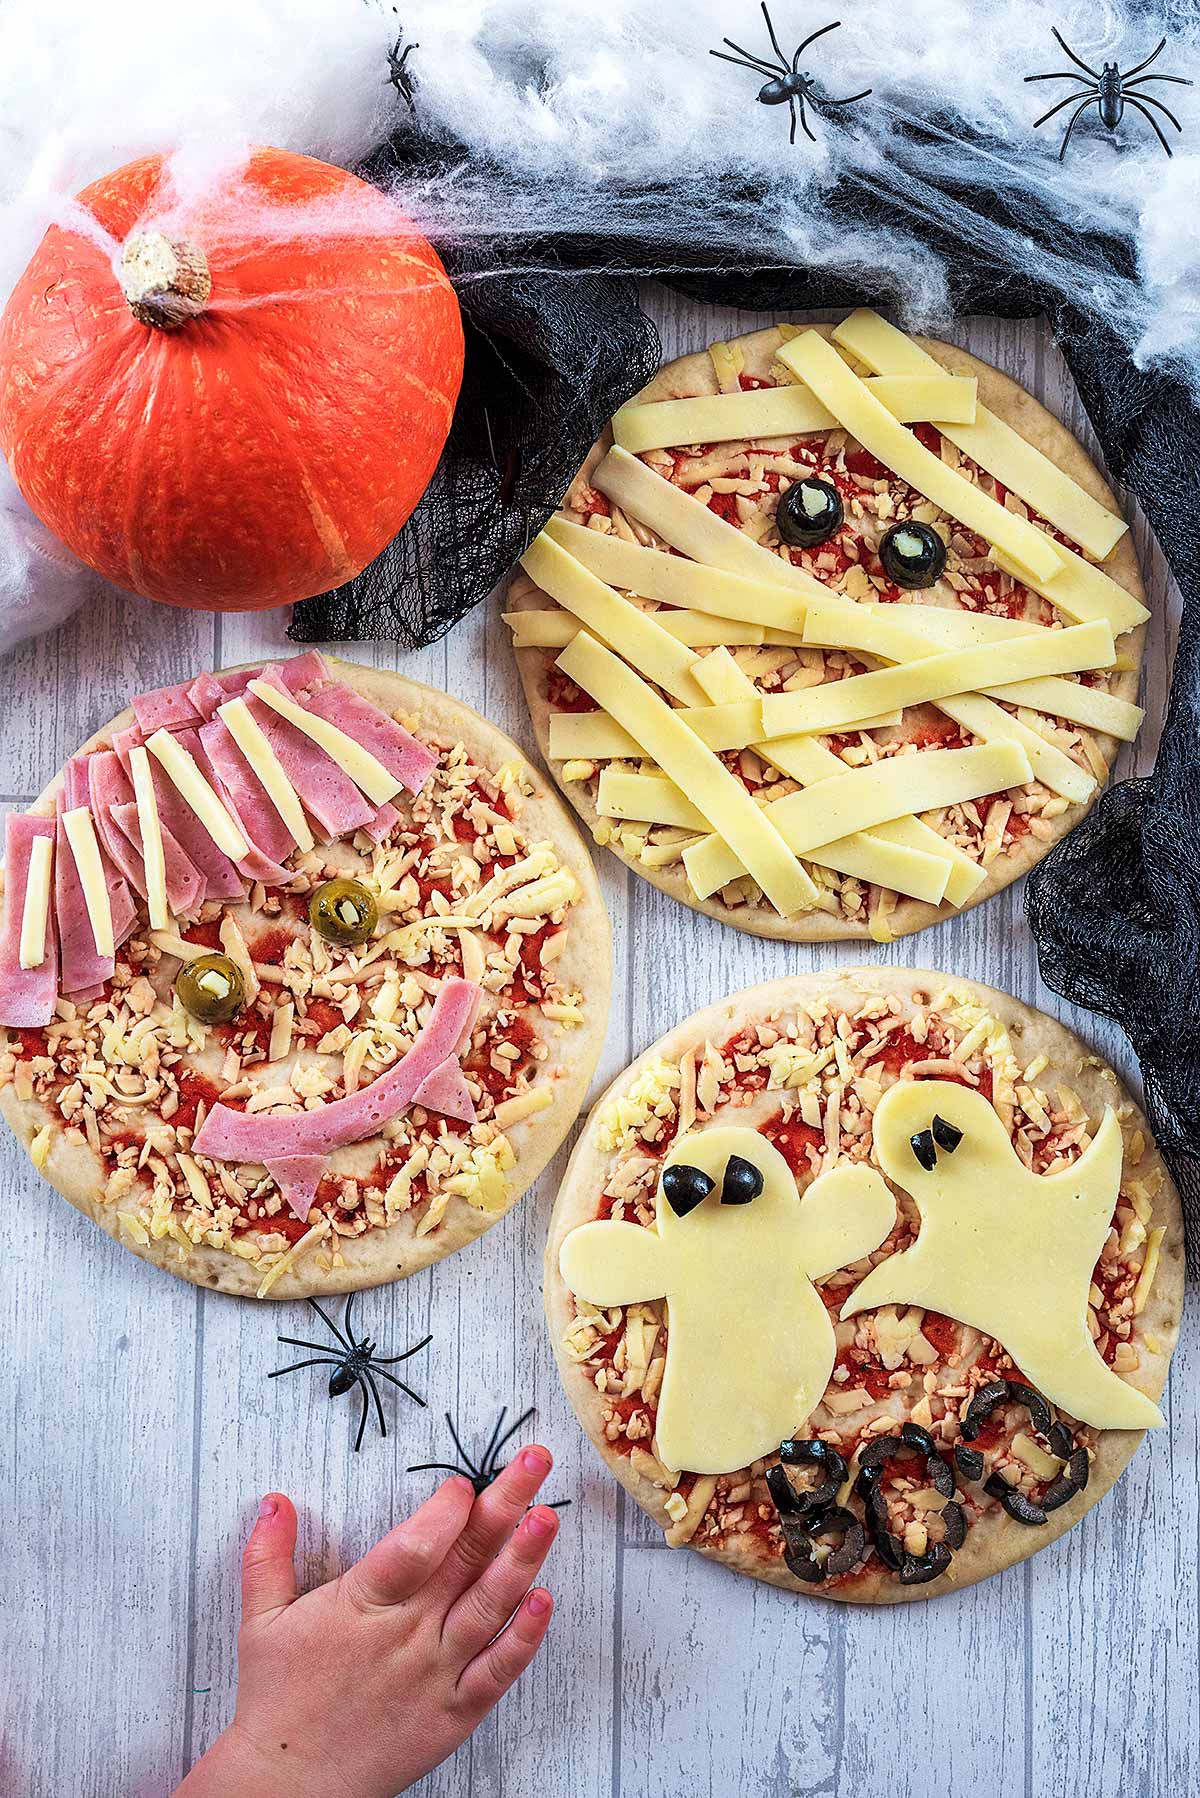 Three pizzas with Halloween themes. A child's hand is reaching in.